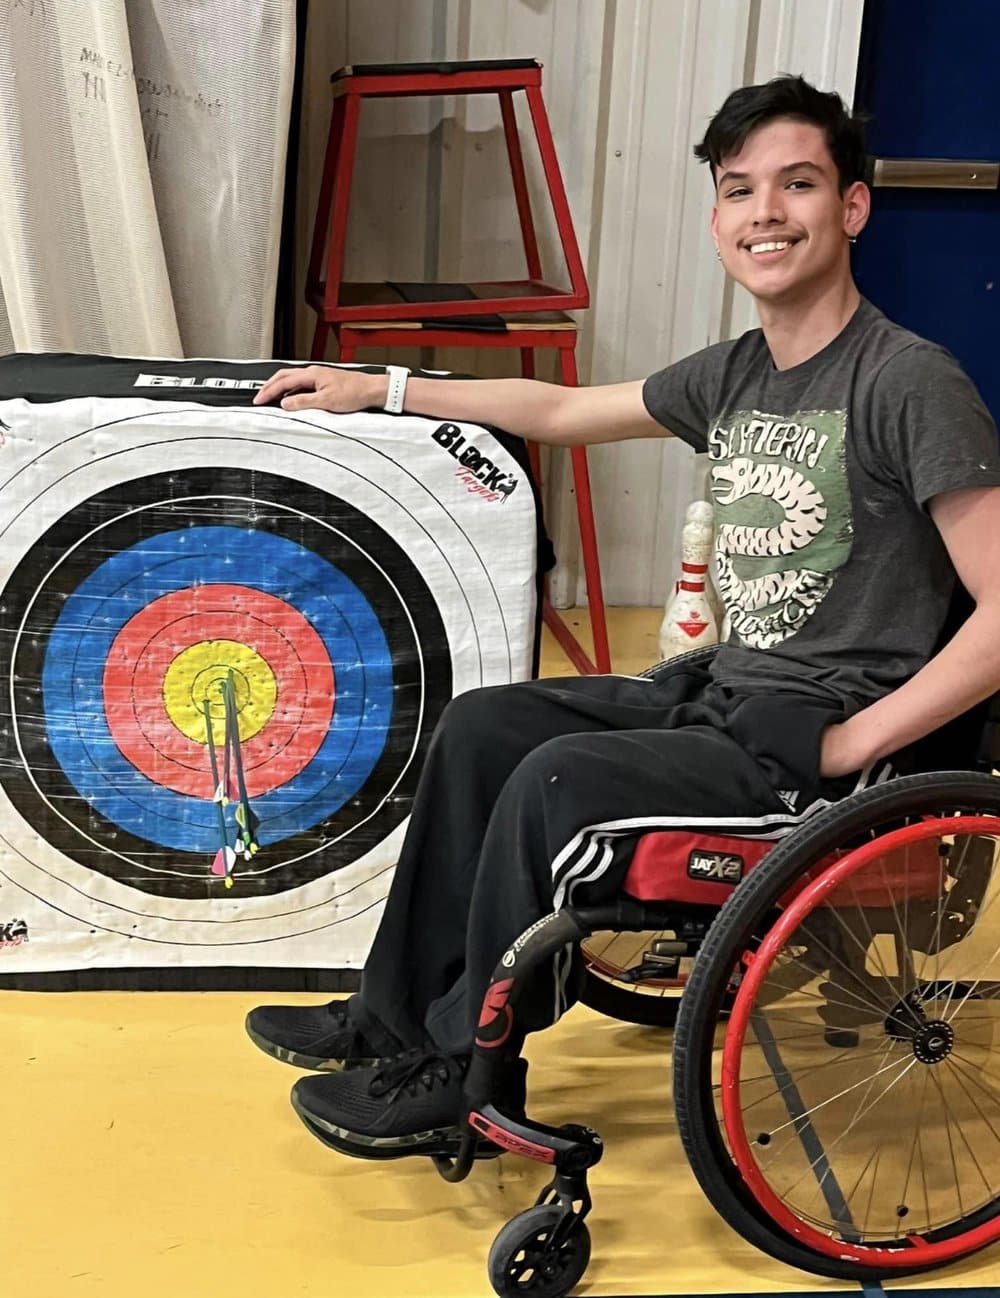 Siemiller’s dedication to archery has taken him to state championship shoots and national level competitions.